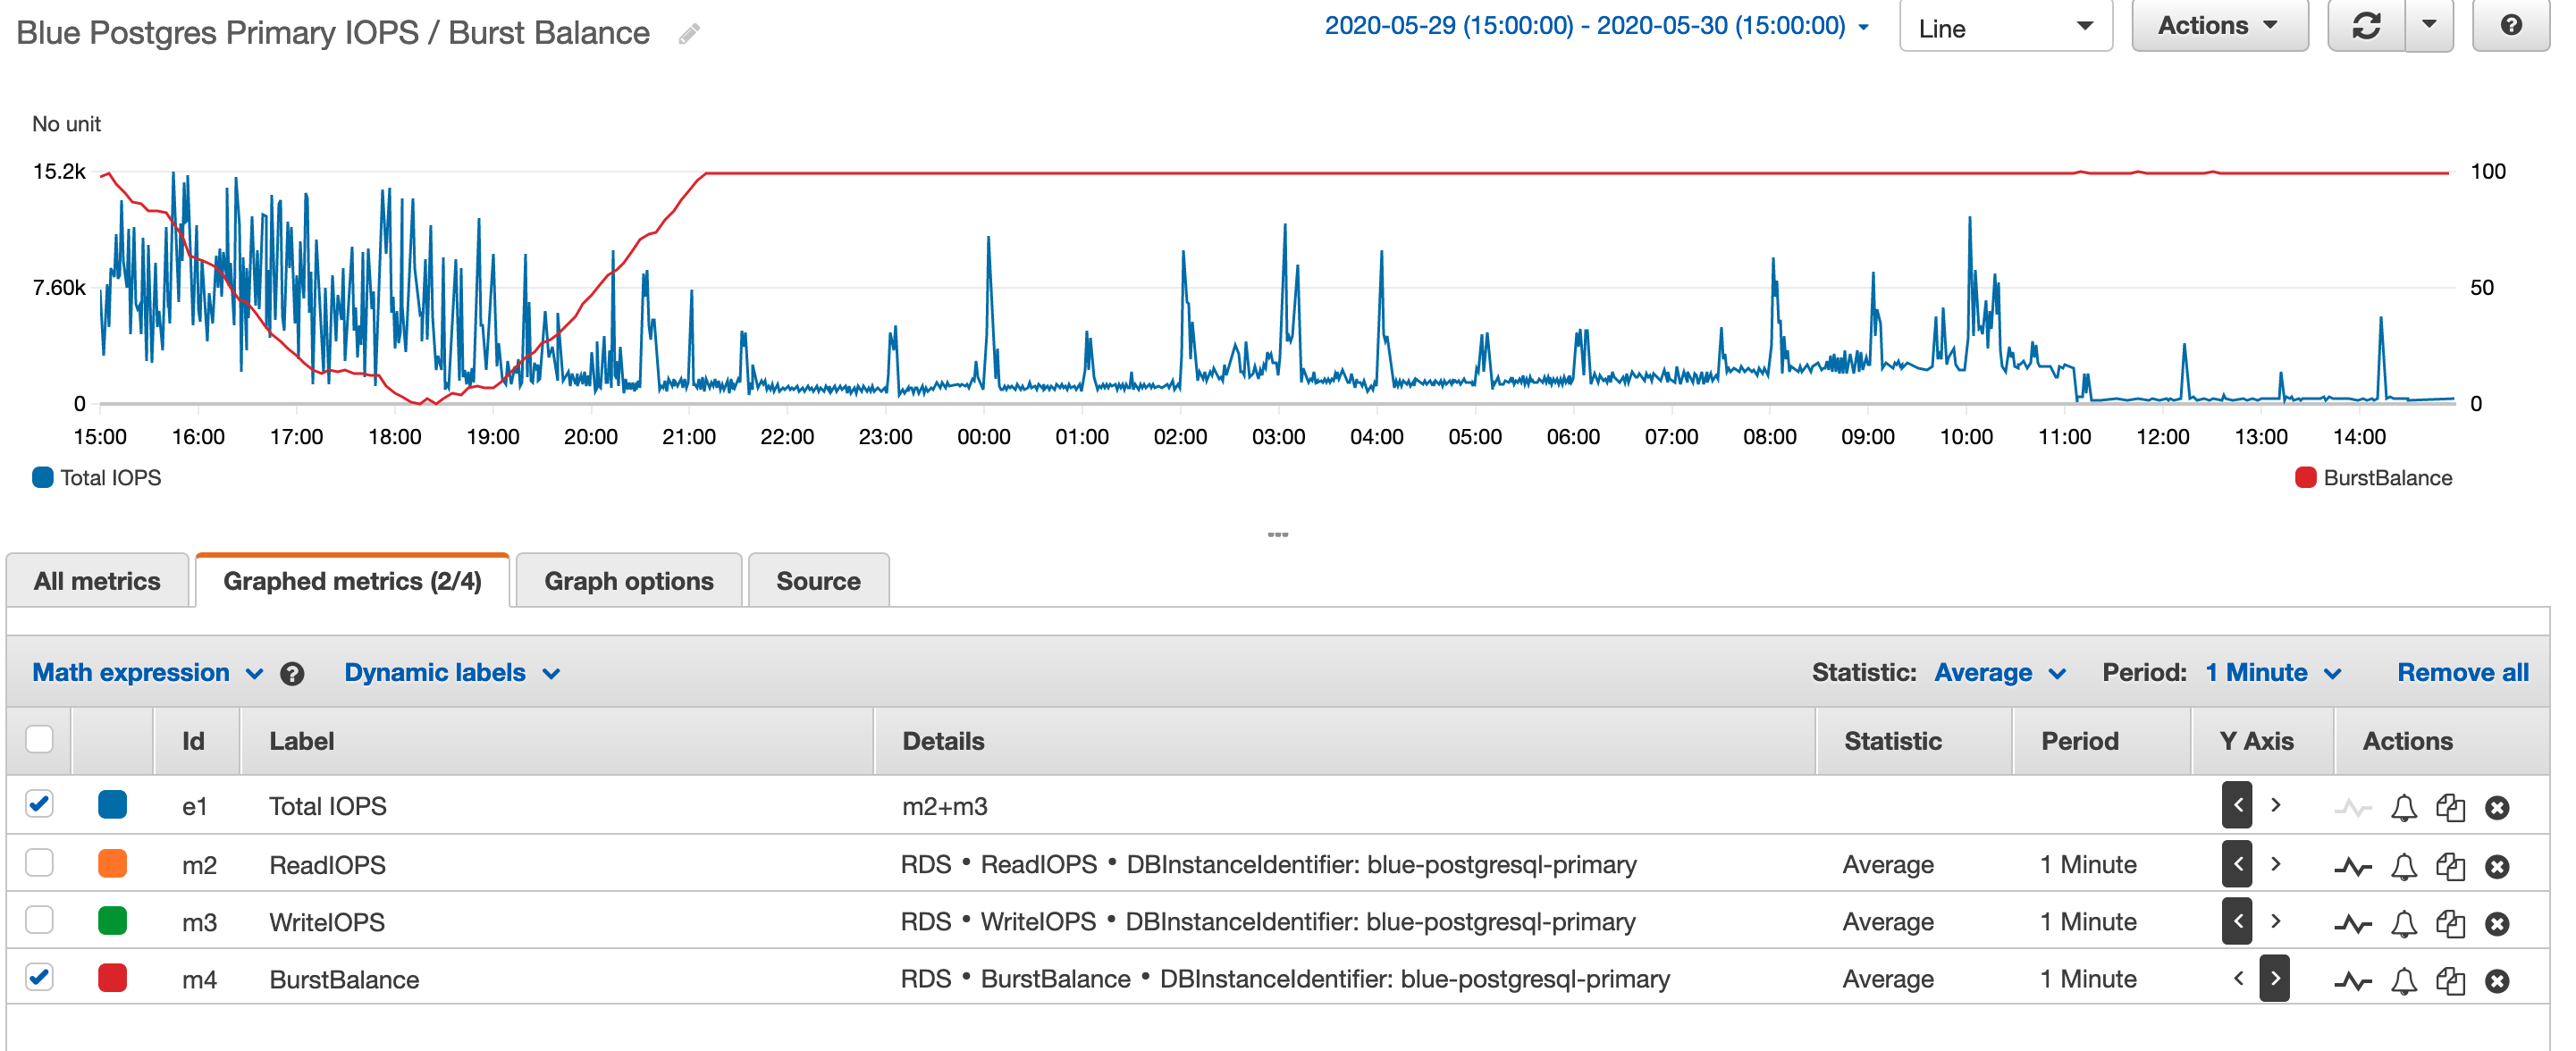 Screenshot of database IOPS and burst balance showing a sustained period of more than seven thousand IOPS, and burst balance being depleted to zero